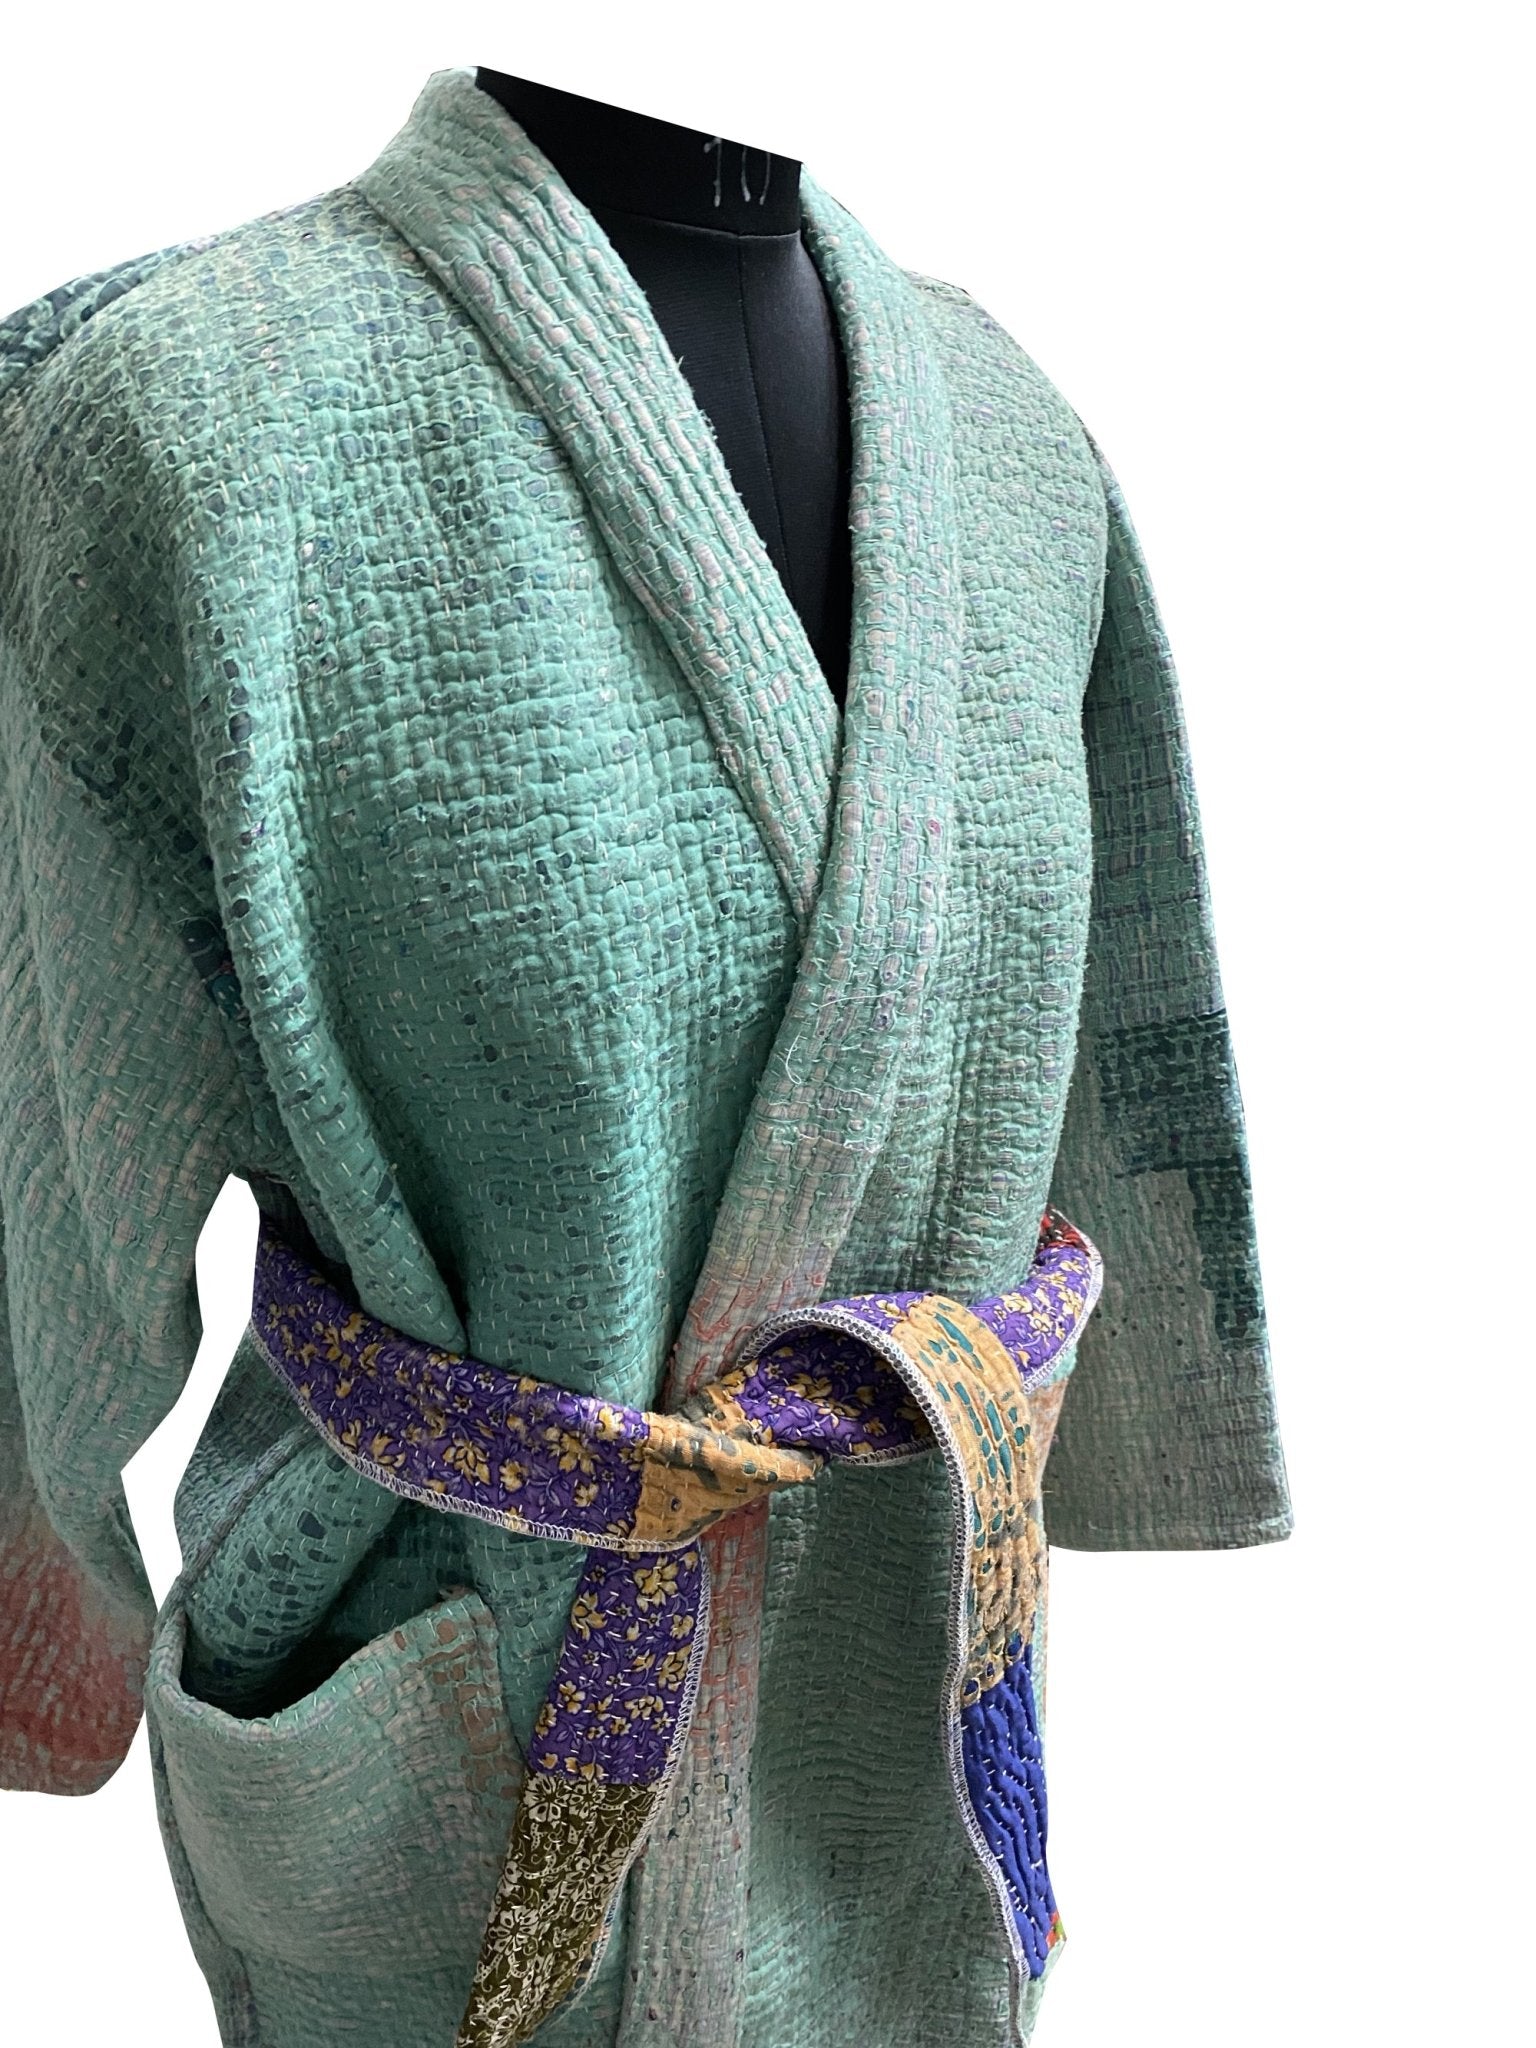 Vintage Thrift Kantha Jacket: Sustainable Outerwear from Upcycled Recycled Sarees - Indianidhi